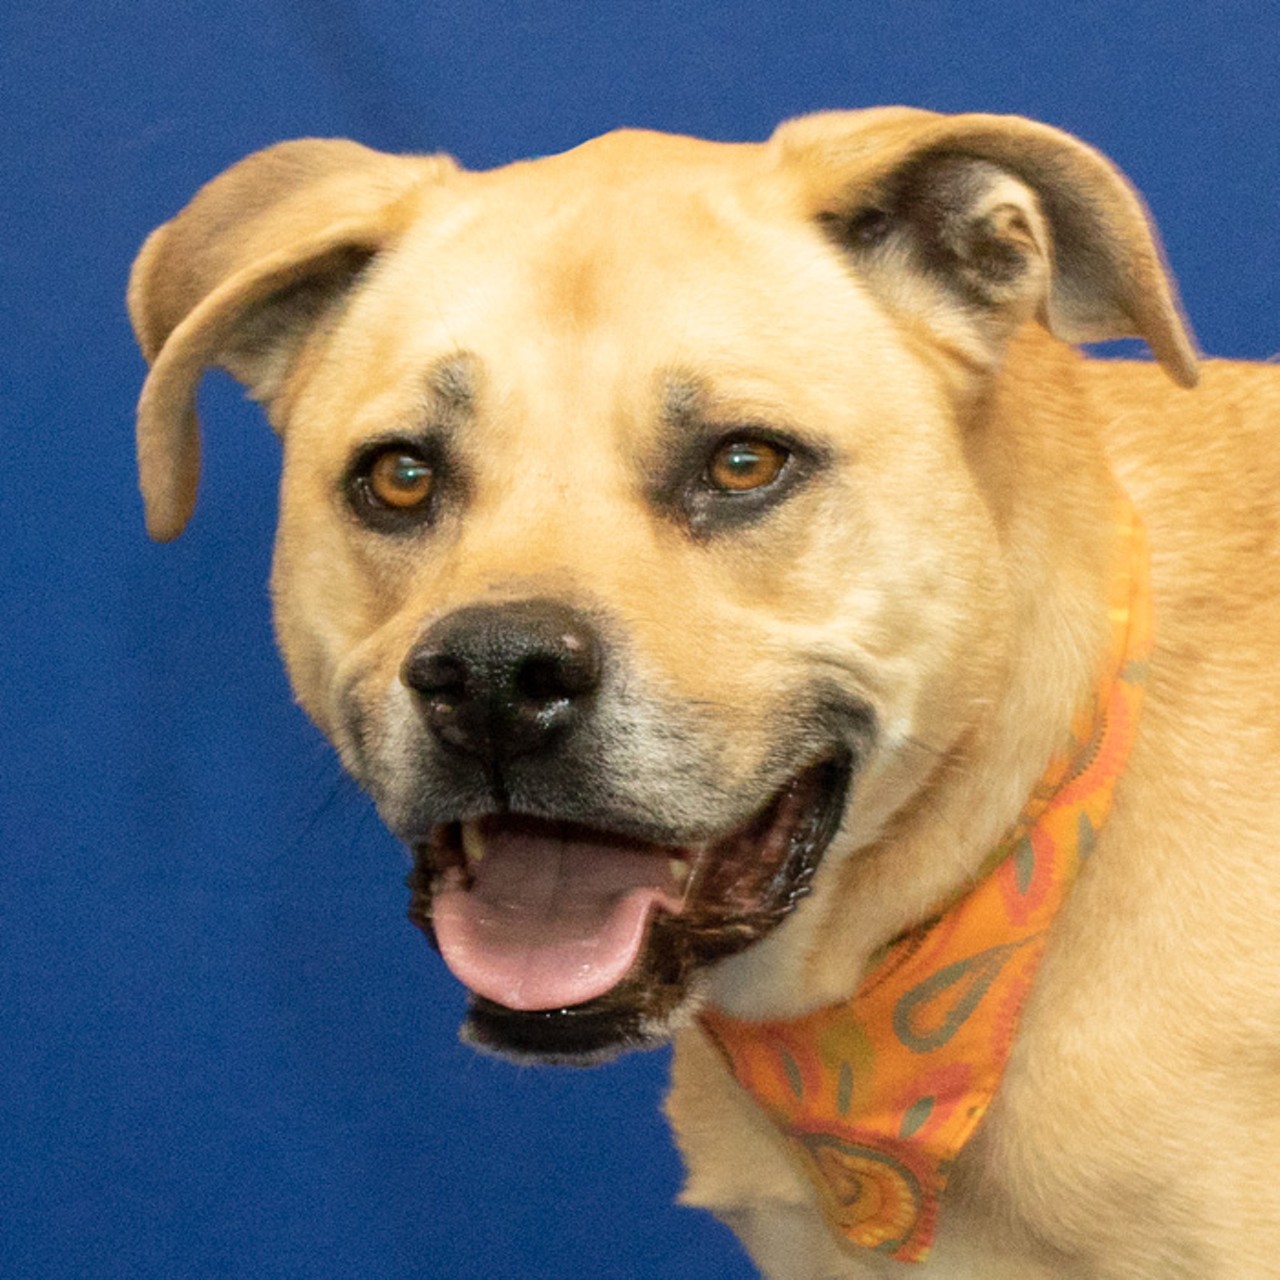 NAME: Princess Bubblegum
GENDER: Female
BREED: Labrador-Rhodesian Ridgeback mix
AGE: 3 years
WEIGHT: 67 pounds
SPECIAL CONSIDERATIONS: None
REASON I CAME TO MHS: Homeless in Westland
LOCATION: Berman Center for Animal Care
ID NUMBER: 869299